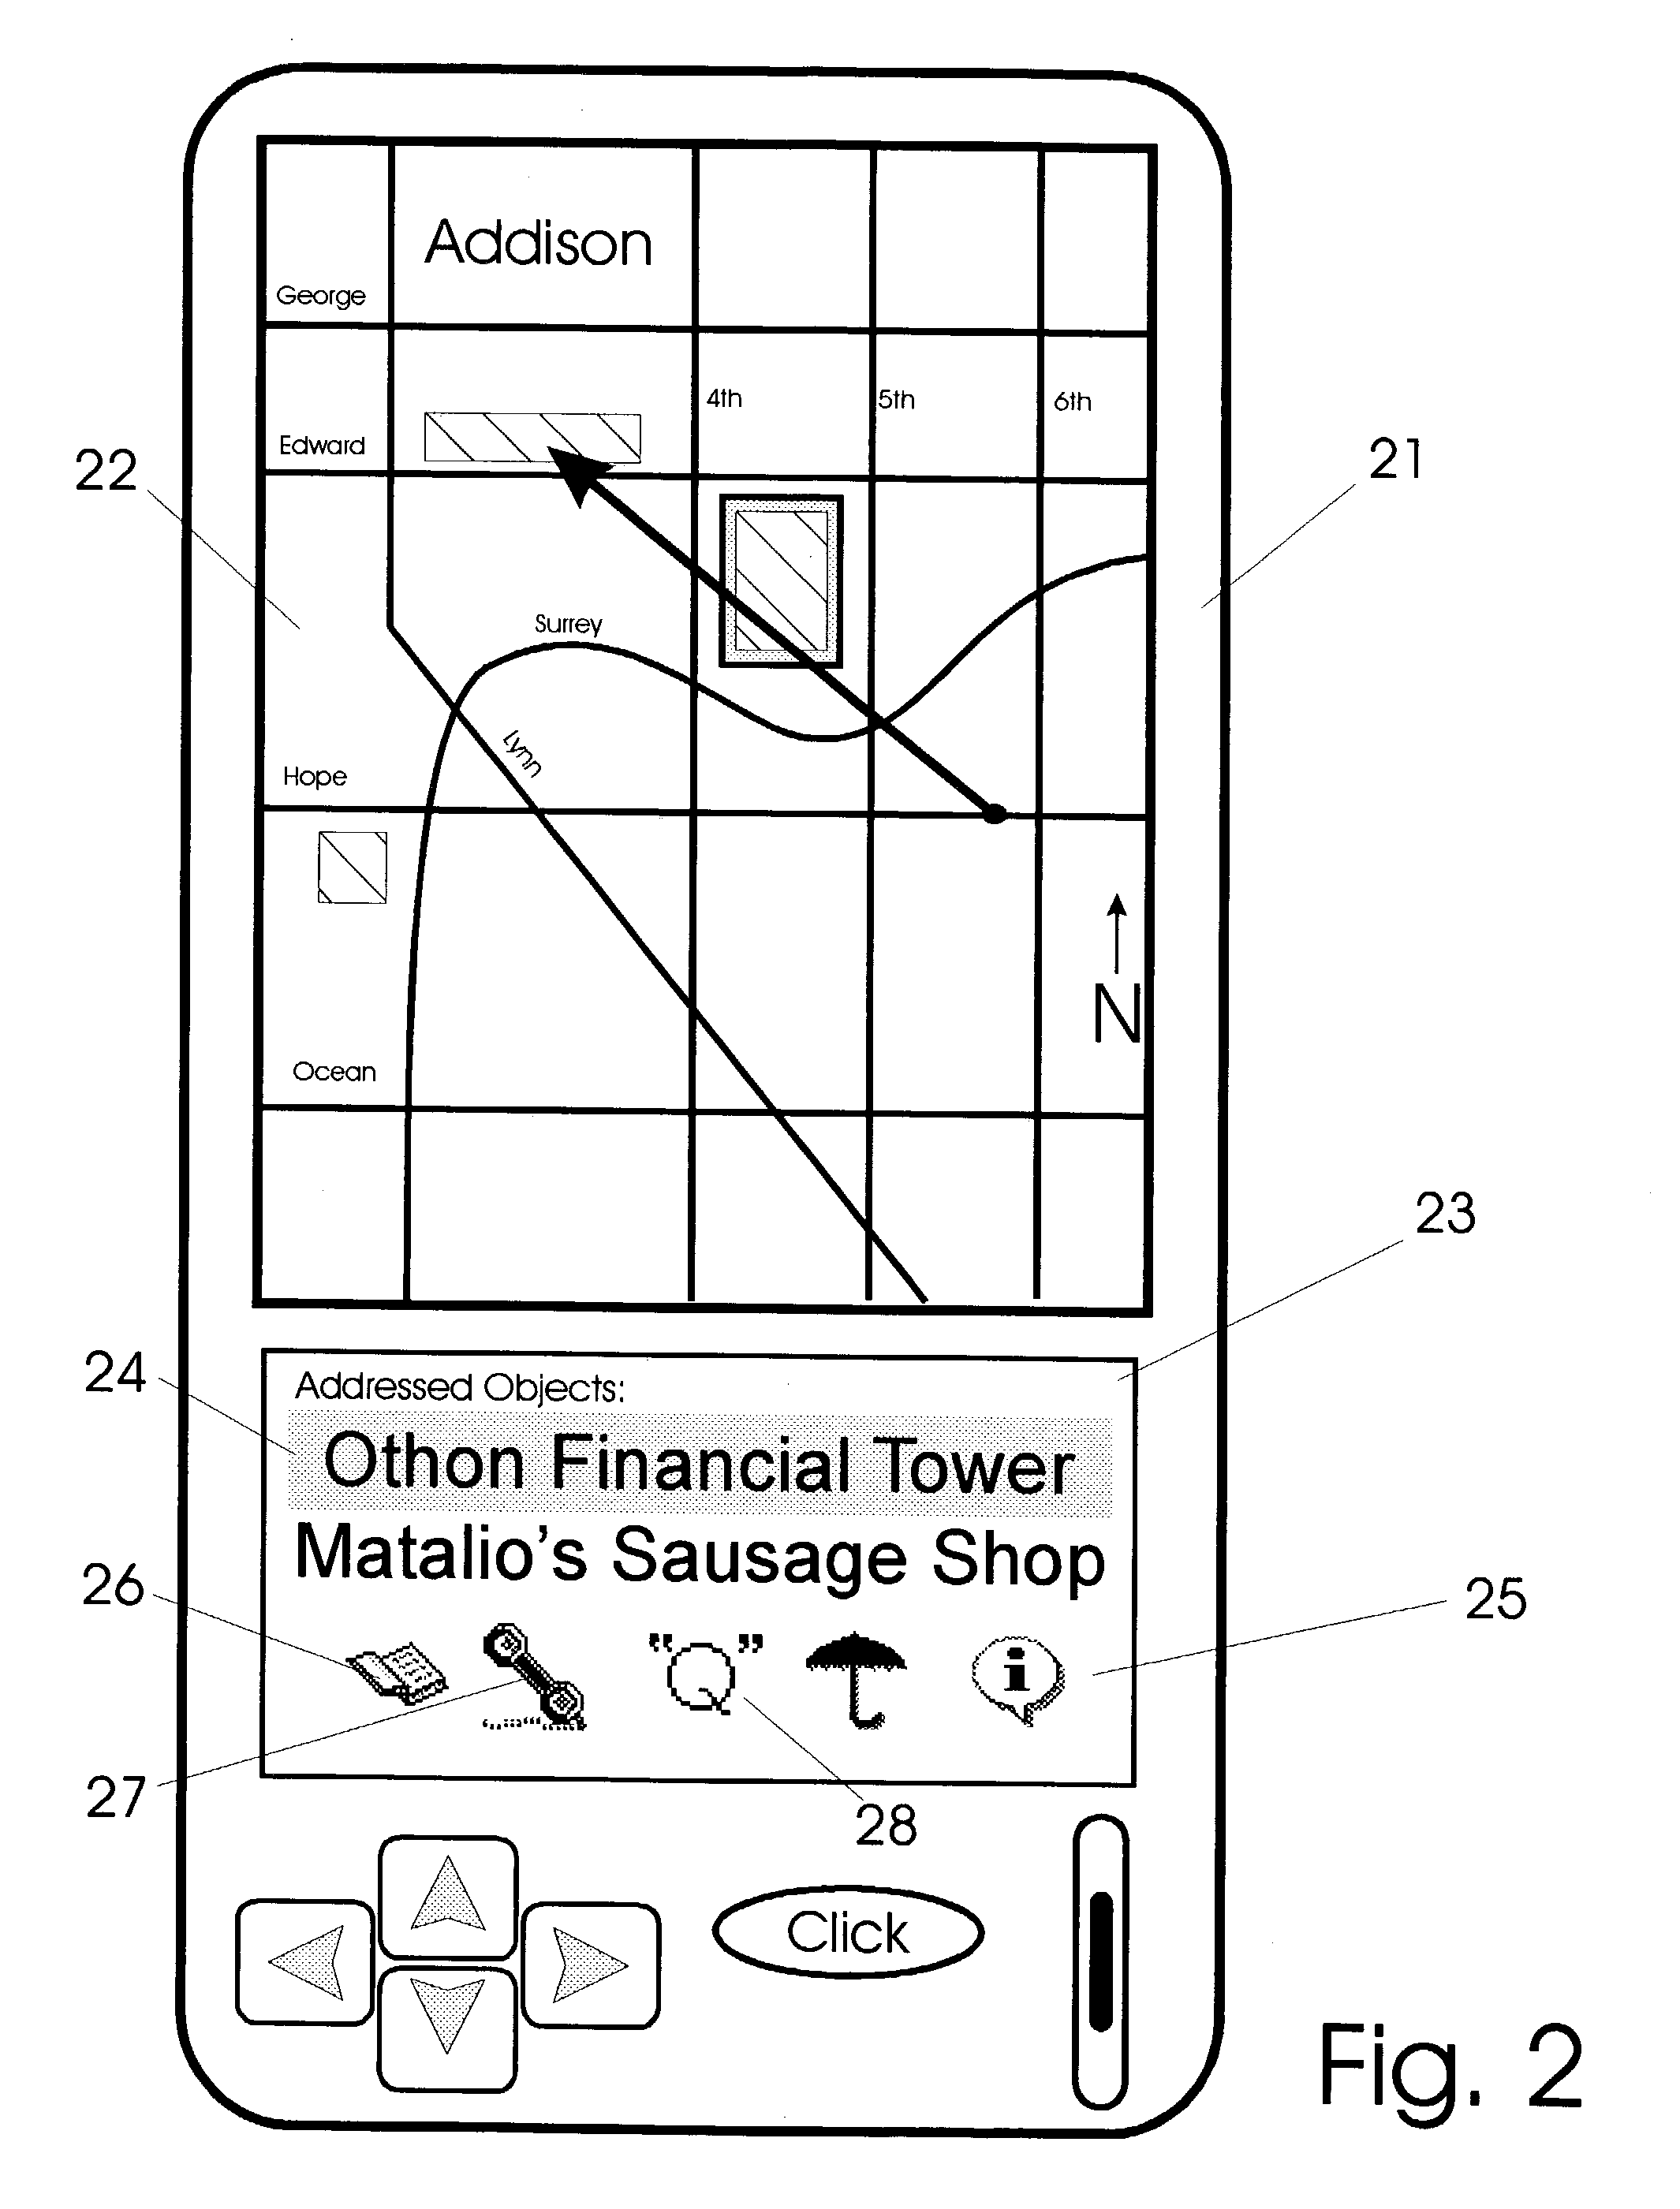 Apparatus and methods for interfacing with remote addressing systems